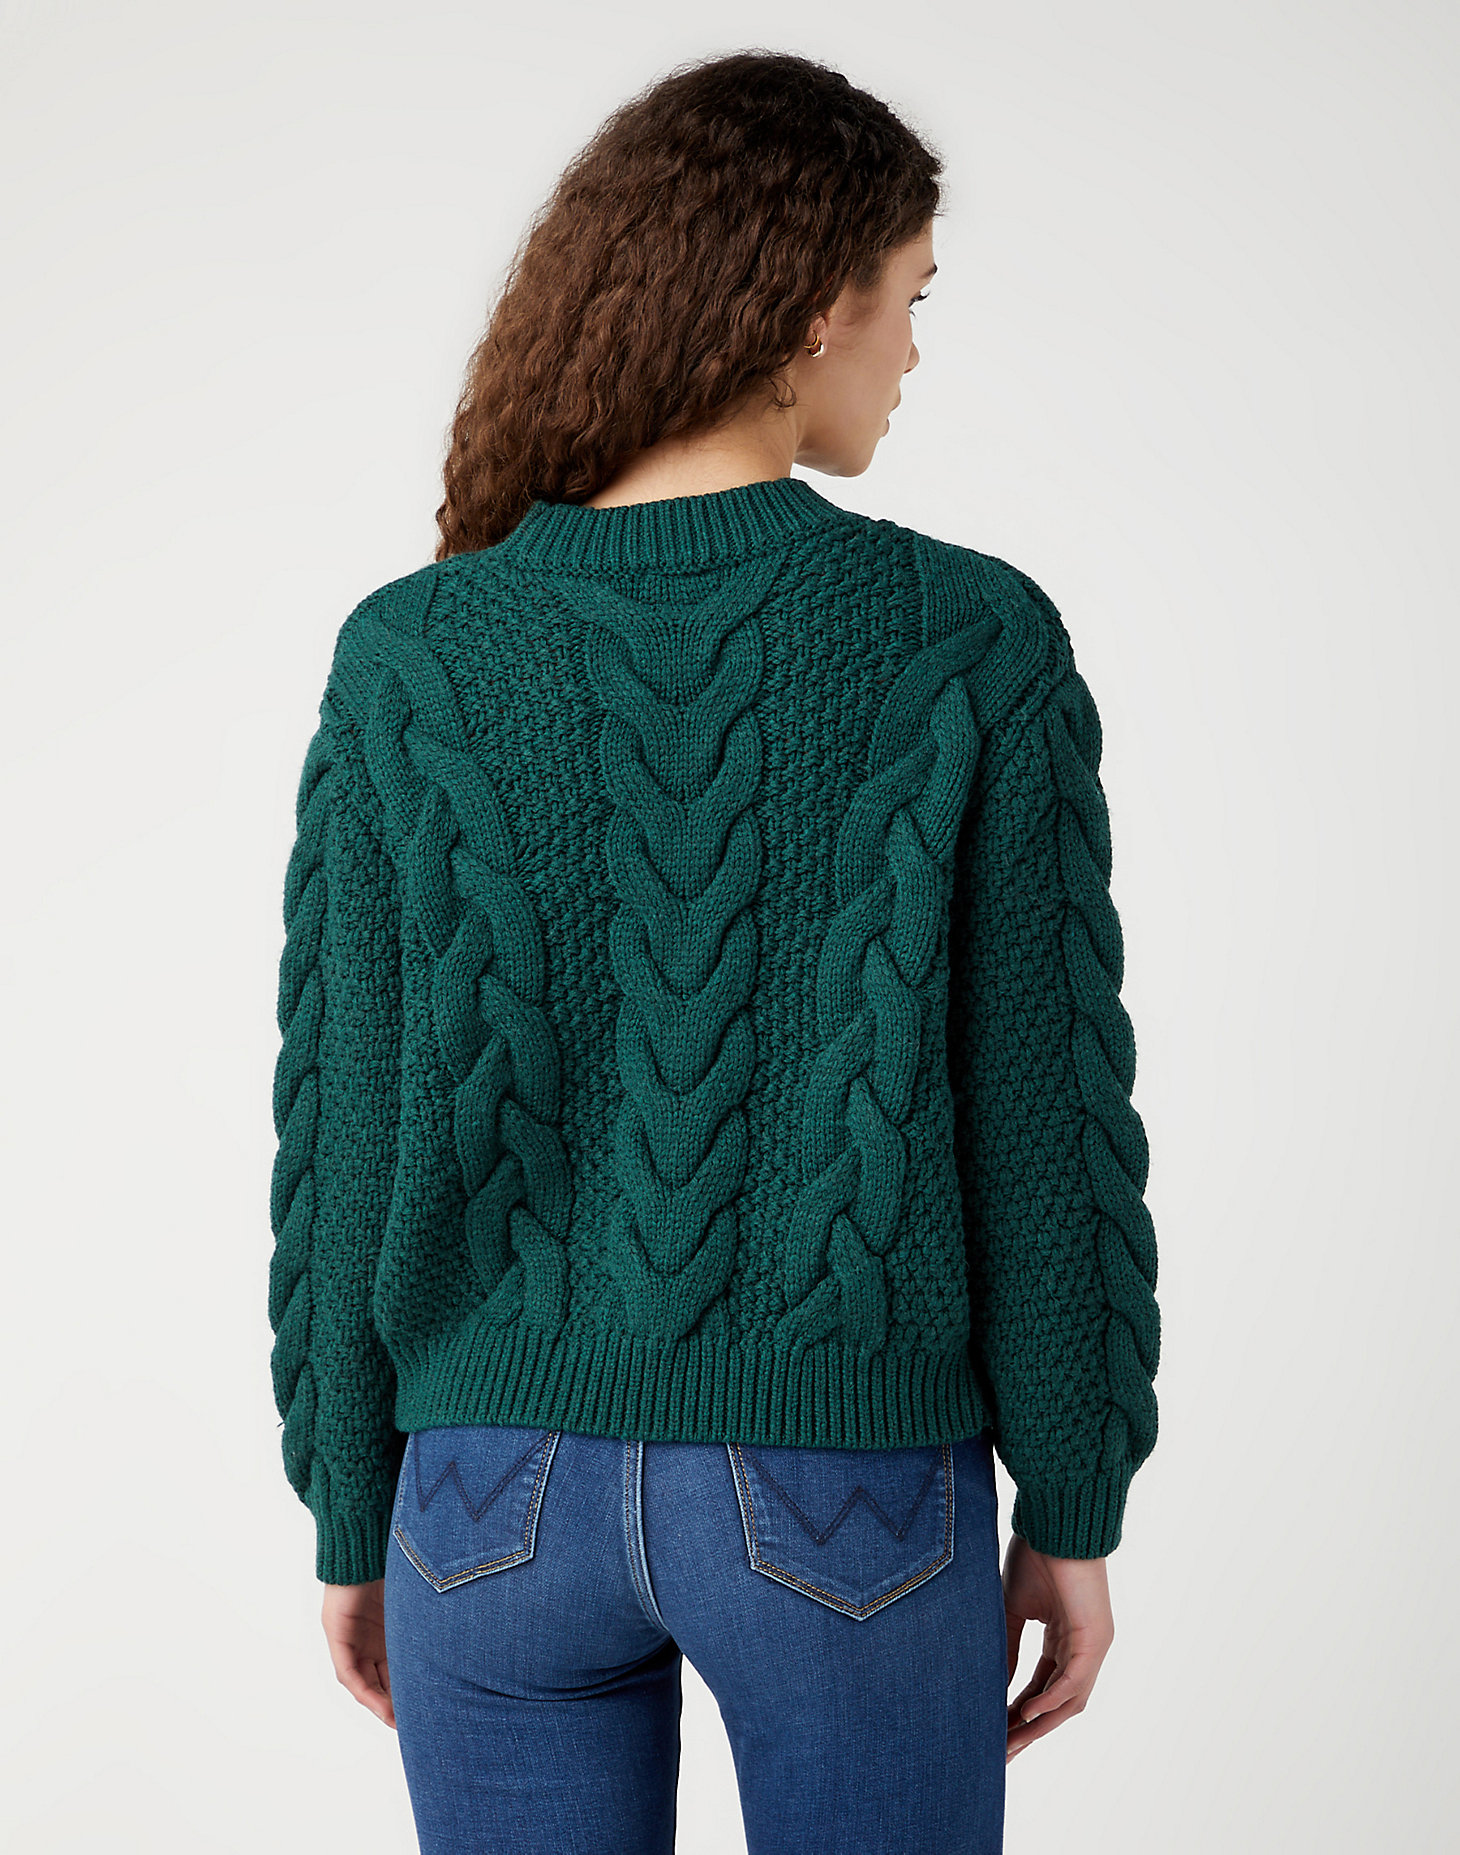 Crew Neck Cable Knit in Dark Matcha alternative view 2